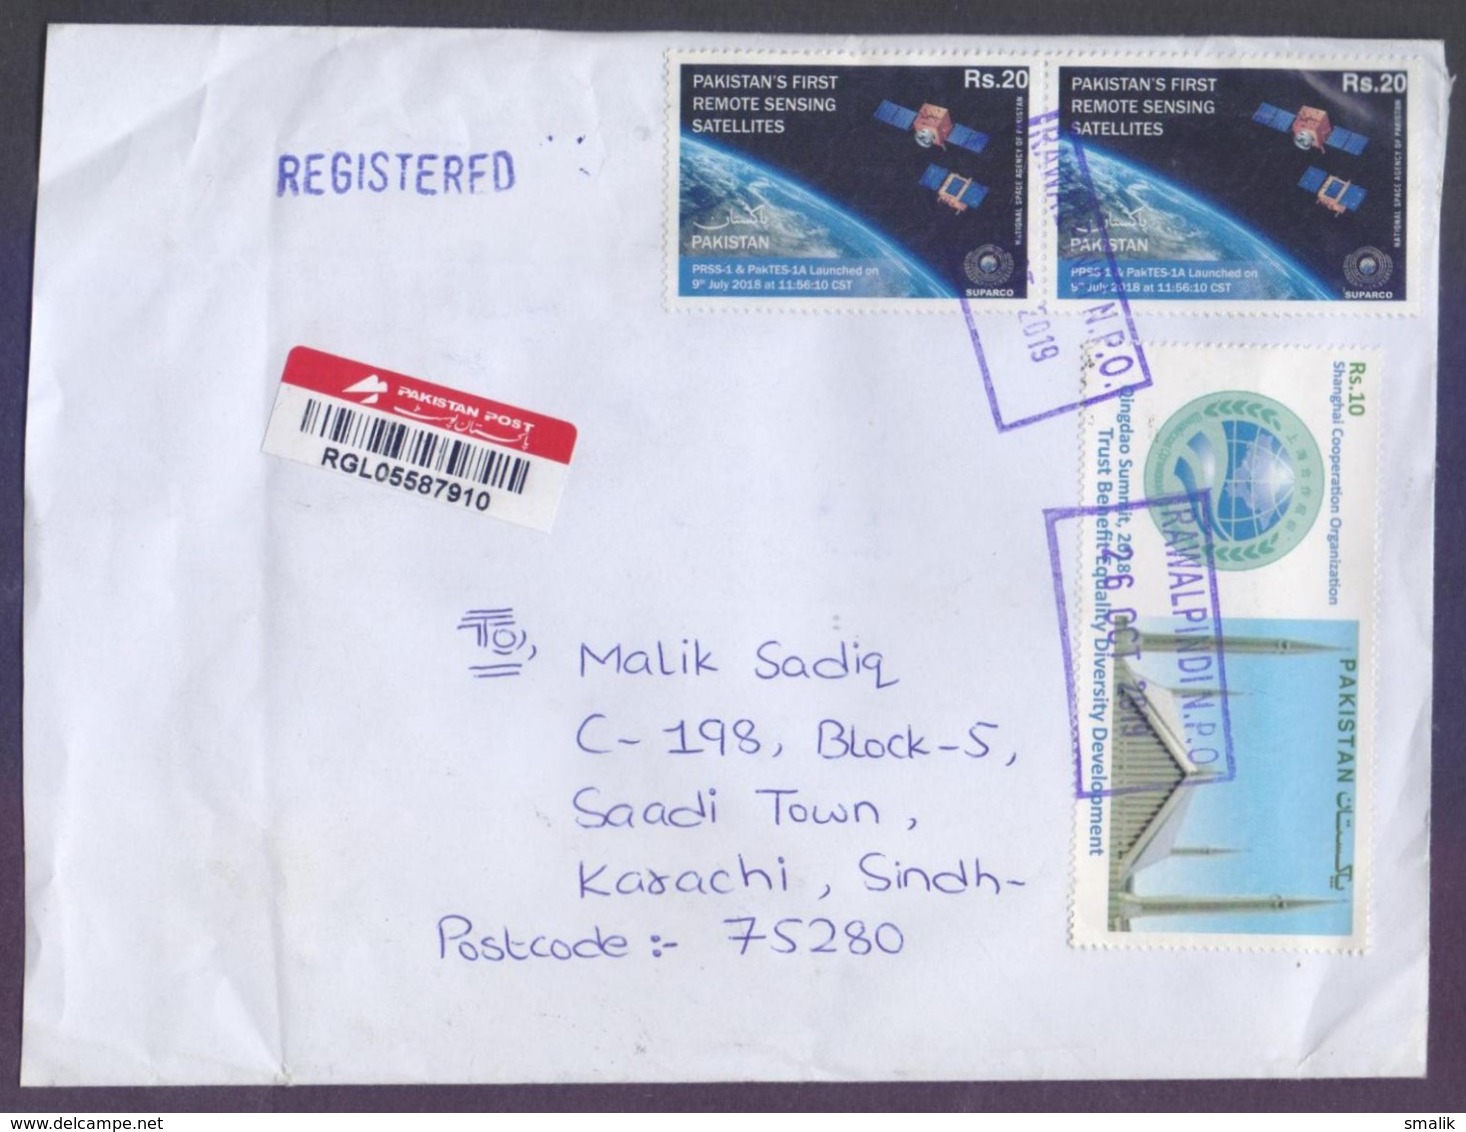 SPACE First Remote Satellites, Qingdao Summit At Shanghai China, Faisal Mosque, Postal History Cover From PAKISTAN, 2019 - Pakistan